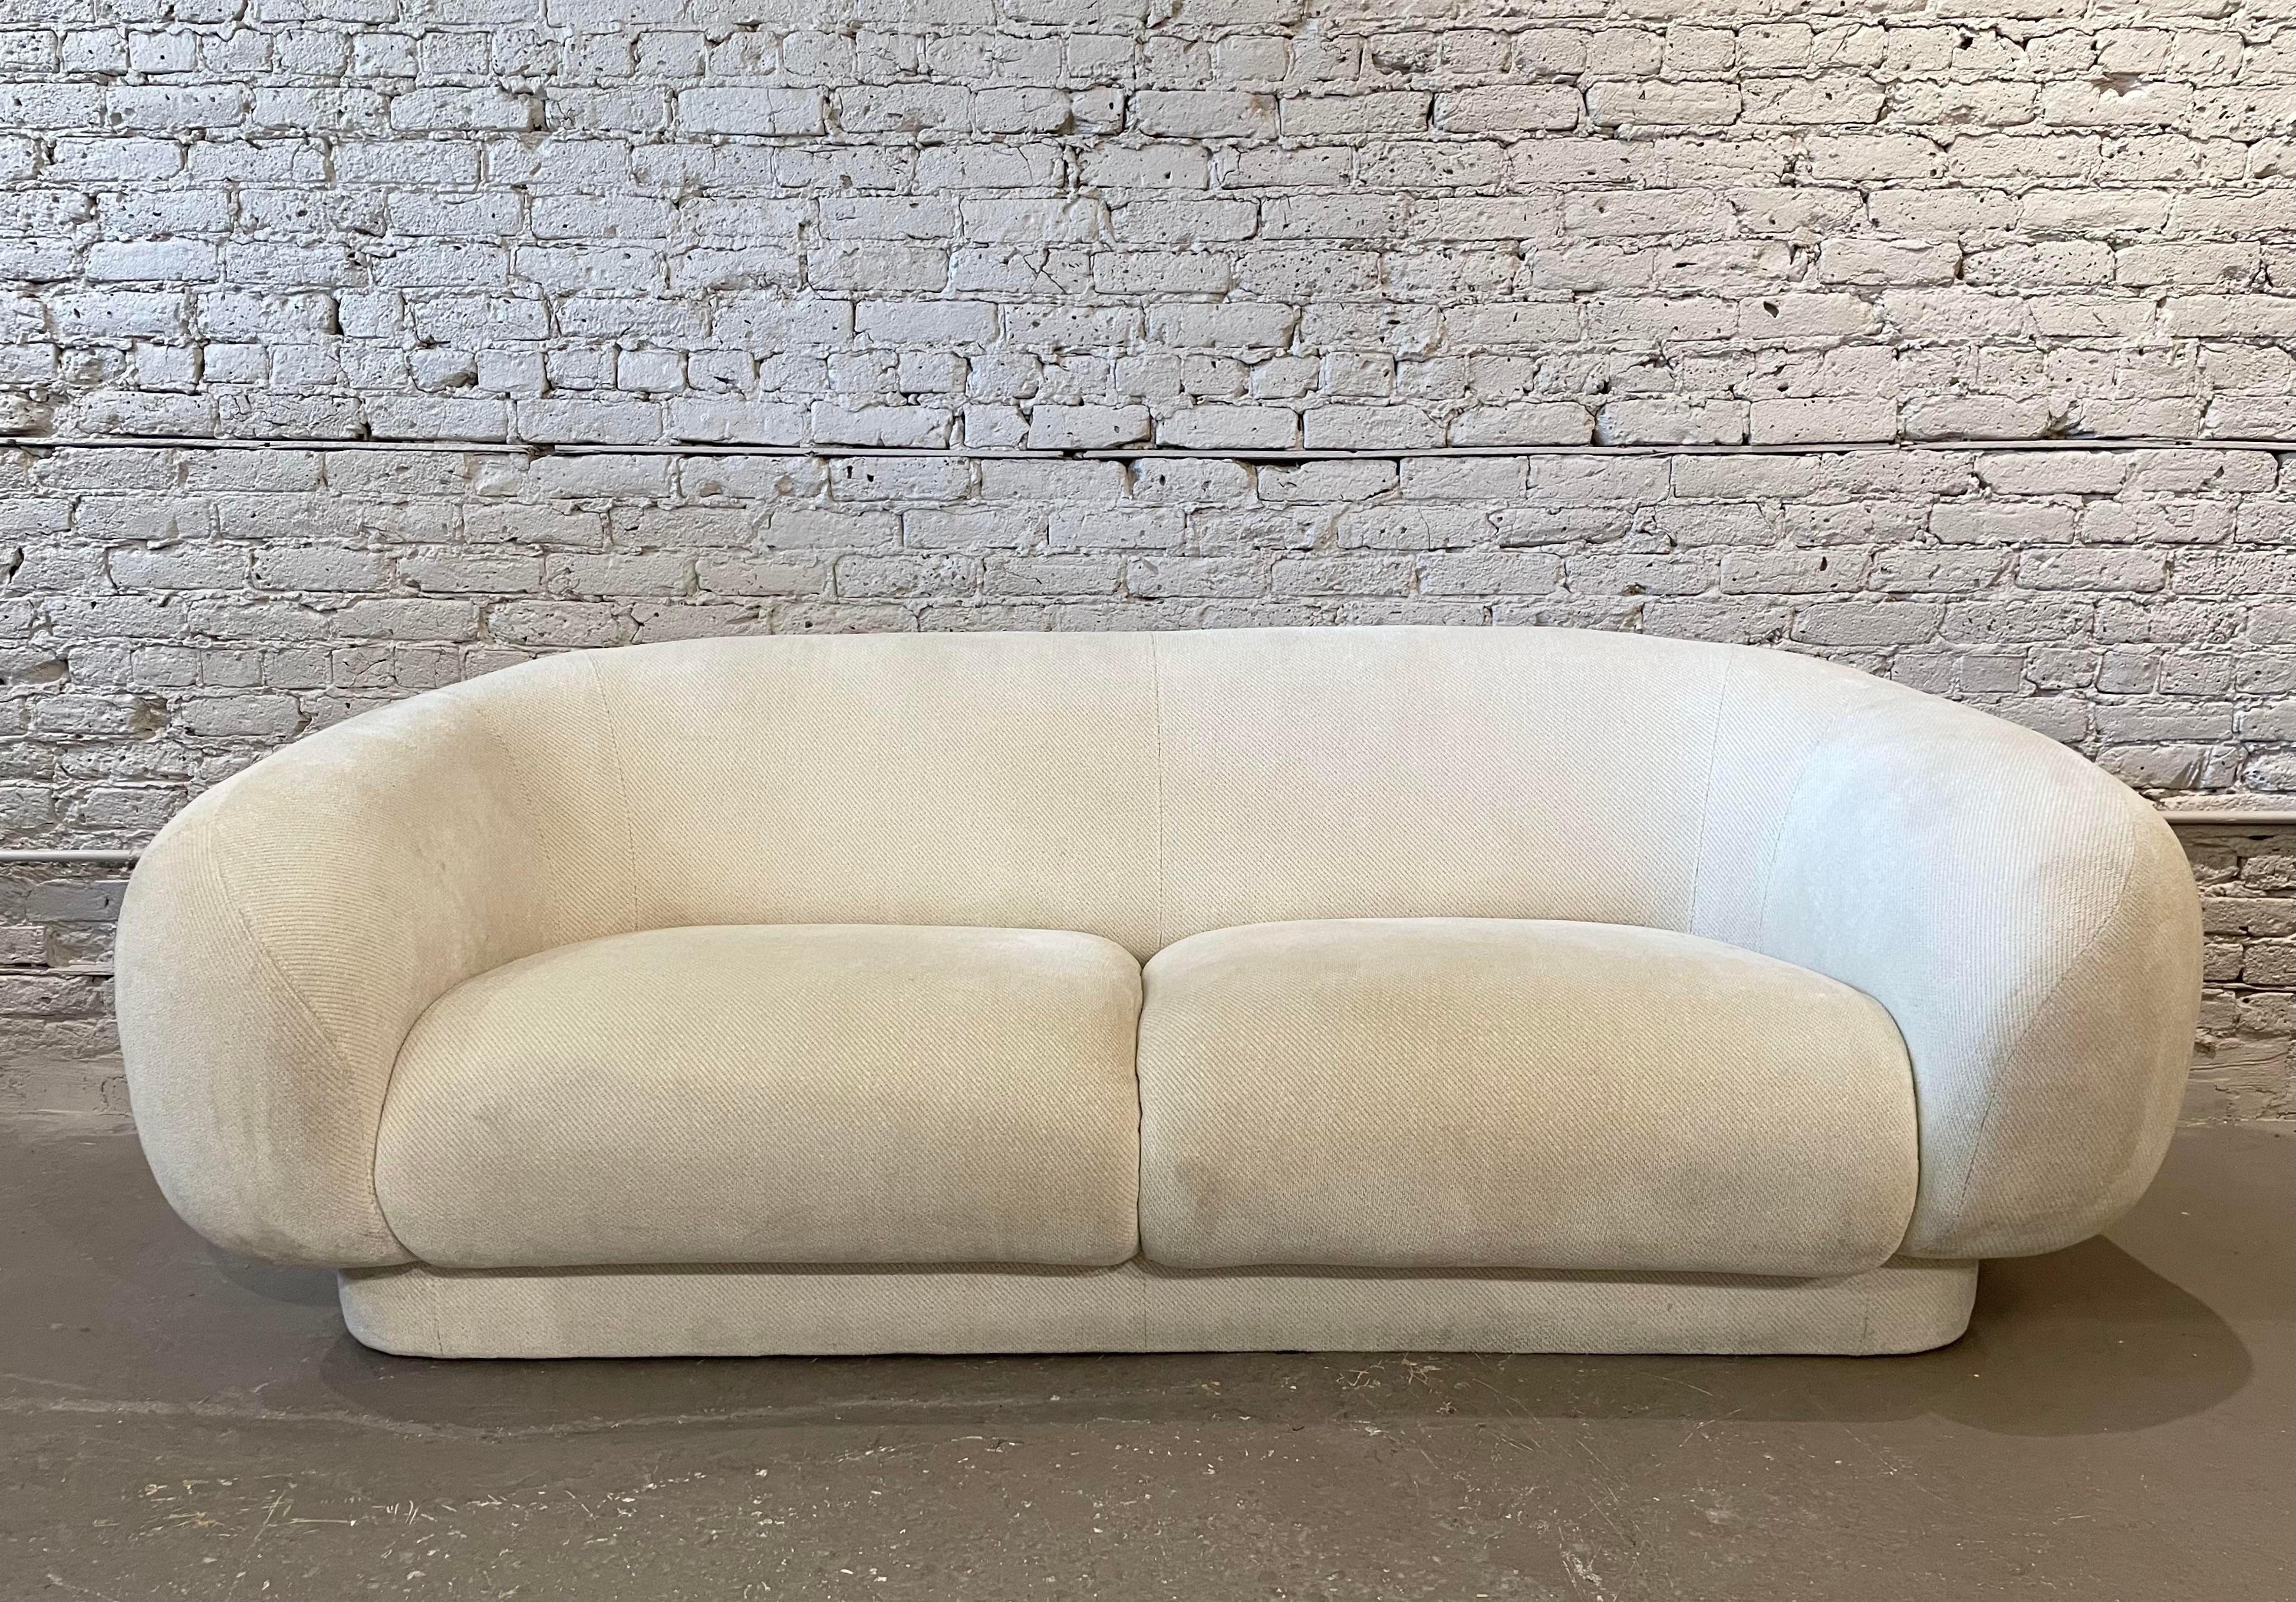 Post-Modern Directional Post Modern Sofa with Rounded Arms